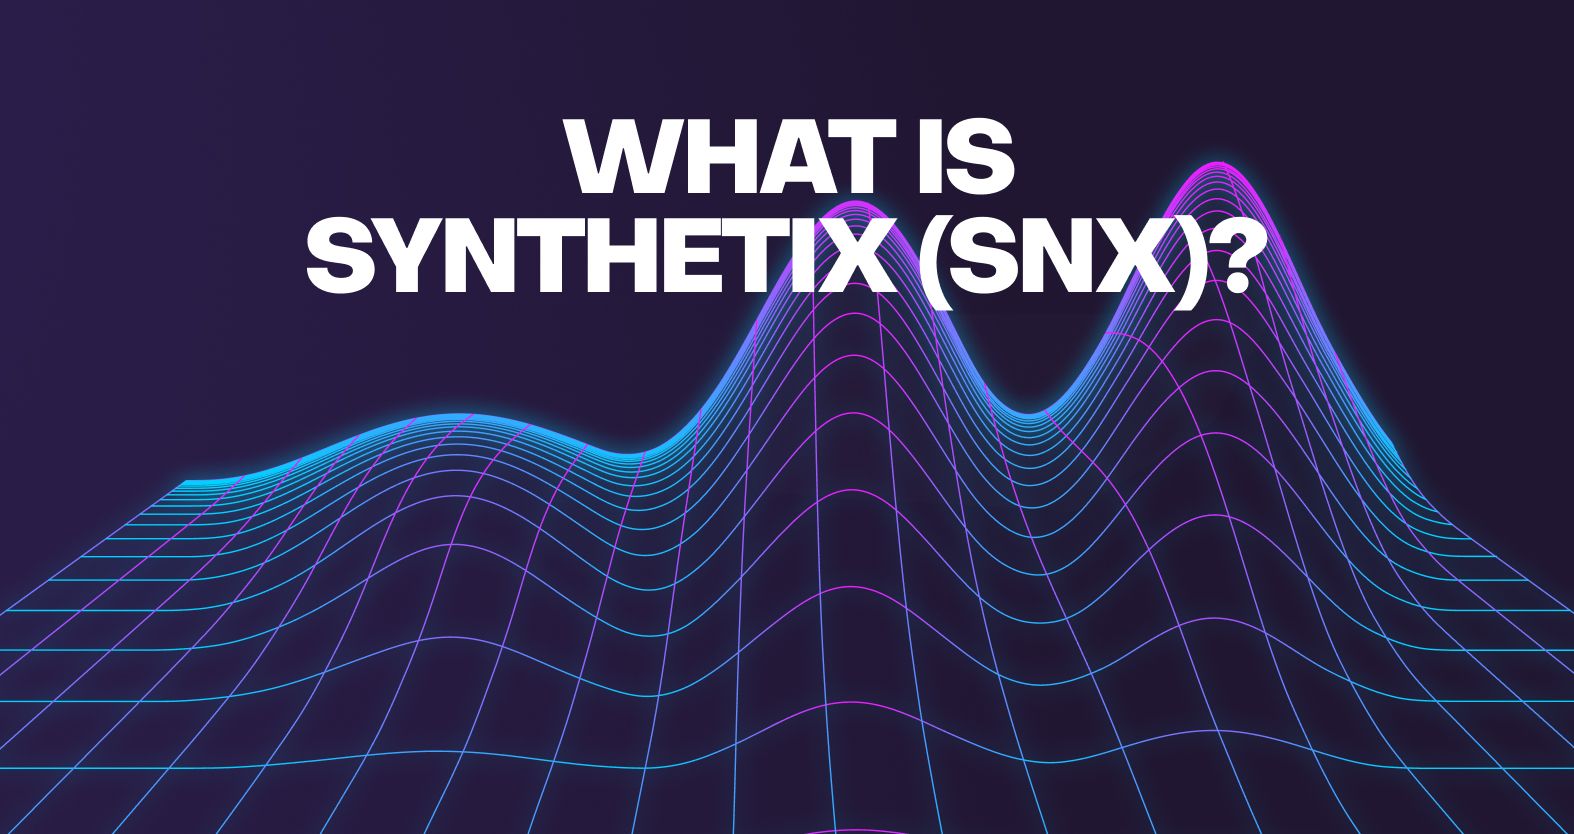 what is Synthetix sn